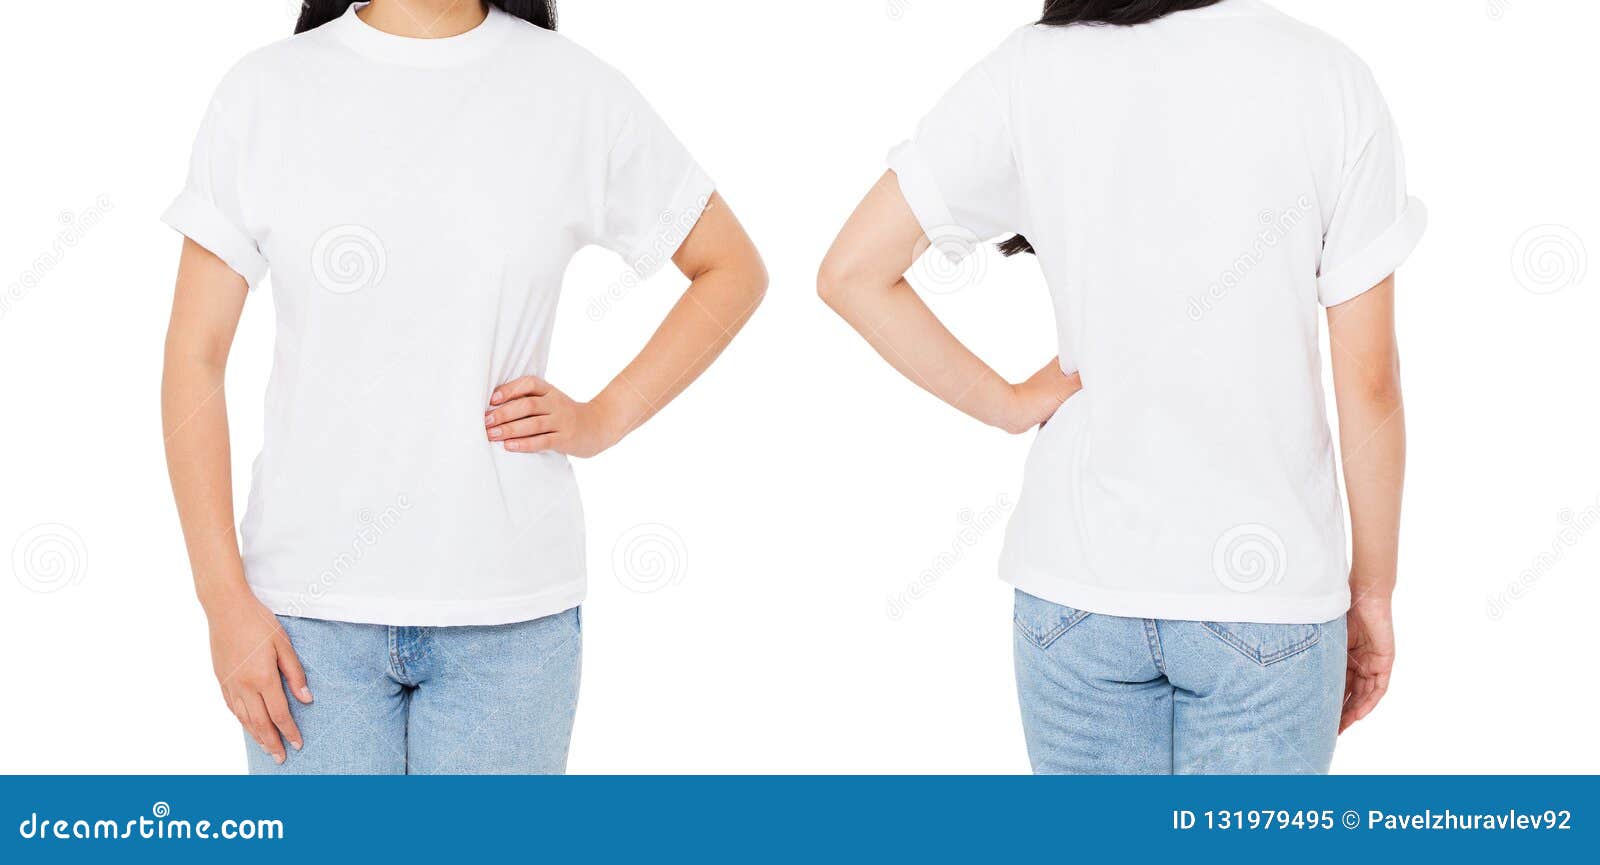 Download Front Back Views Woman In T Shirt Isolated On White ...